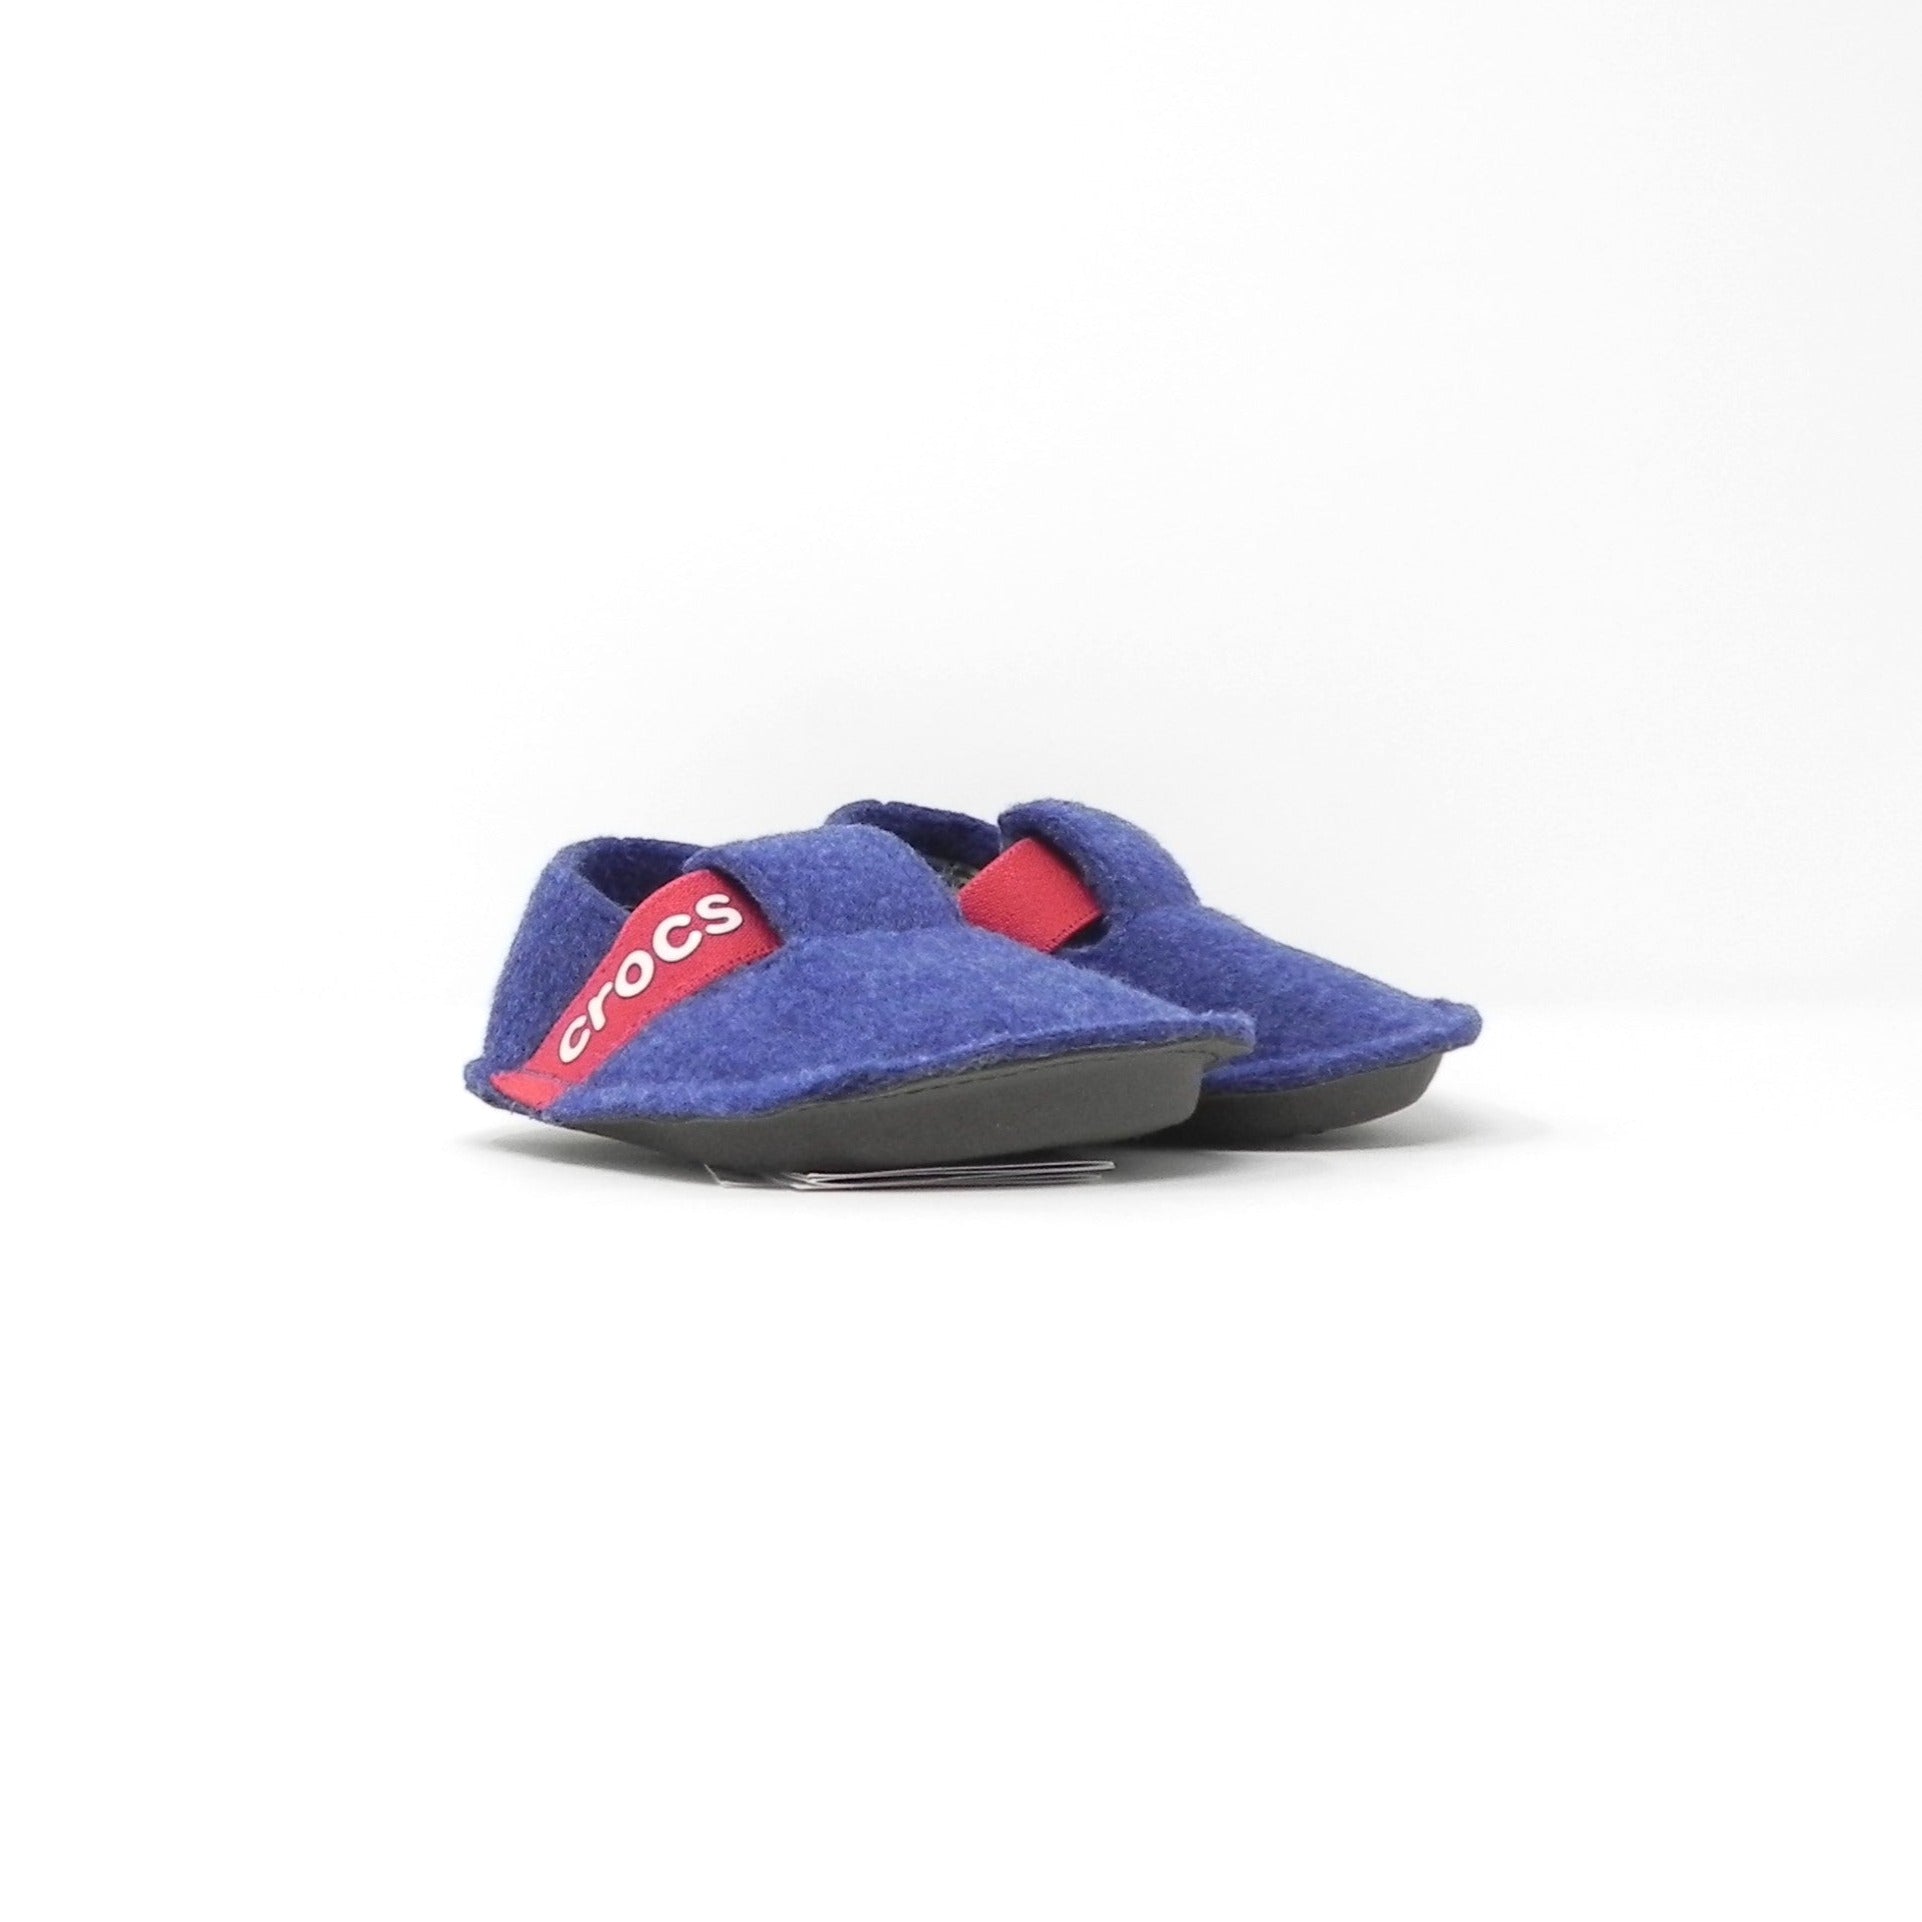 CROCS - Pantofole Classic Slipper Relaxed Fit